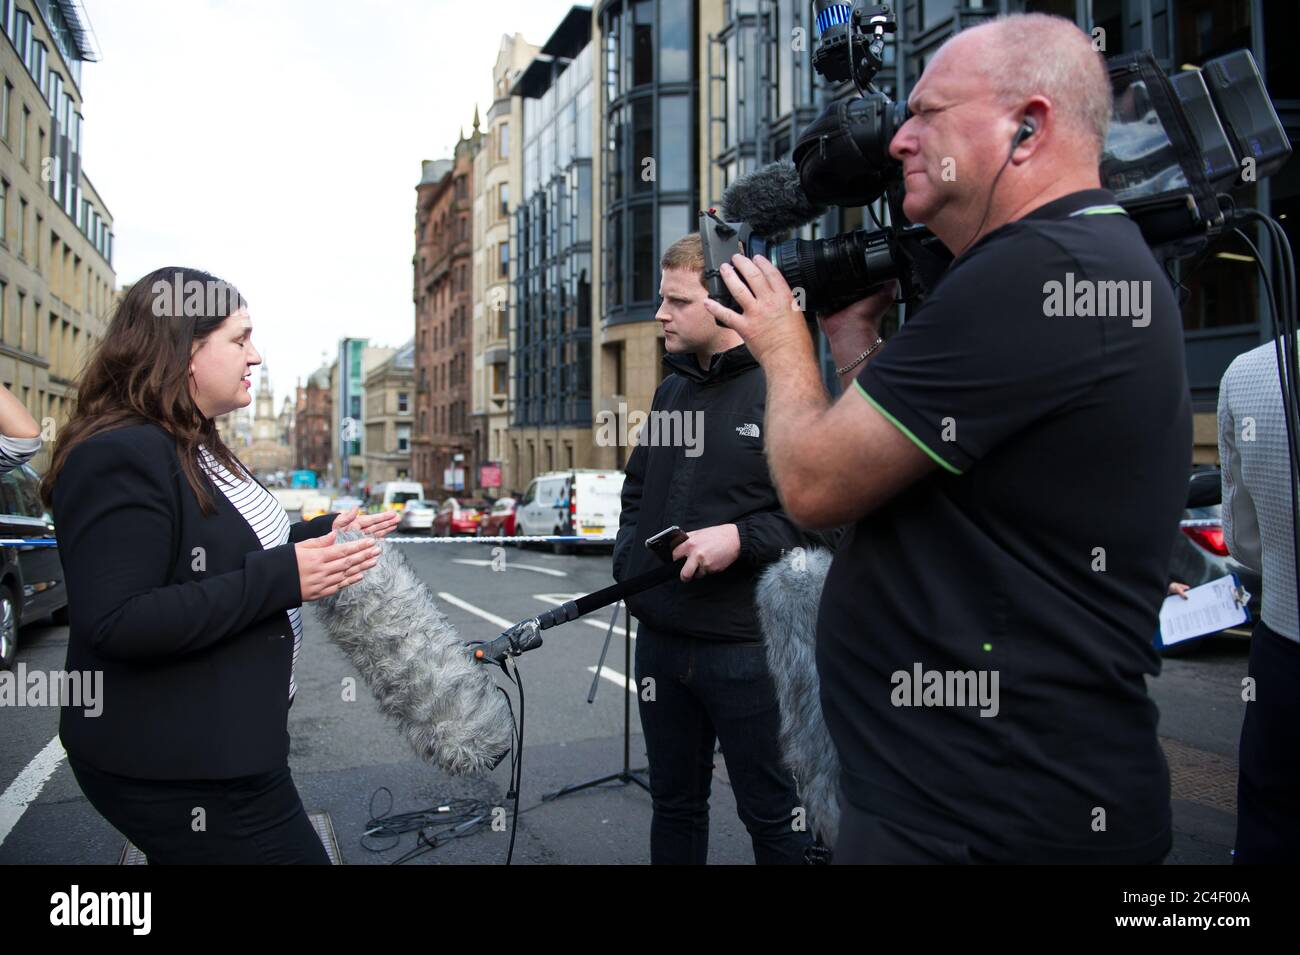 Glasgow, Scotland, UK. 26th June, 2020. Pictured: Press conference: Cllr Susan Aitken - Leader of Glasgow City Council giving an interview. A major police incident has been declared in Glasgow as 6 people have been stabbed including a police officer and police shooting dead the attacker at a major incident at the Park Inn in West George Street which is hosting asylum seekers. Credit: Colin Fisher/Alamy Live News Stock Photo